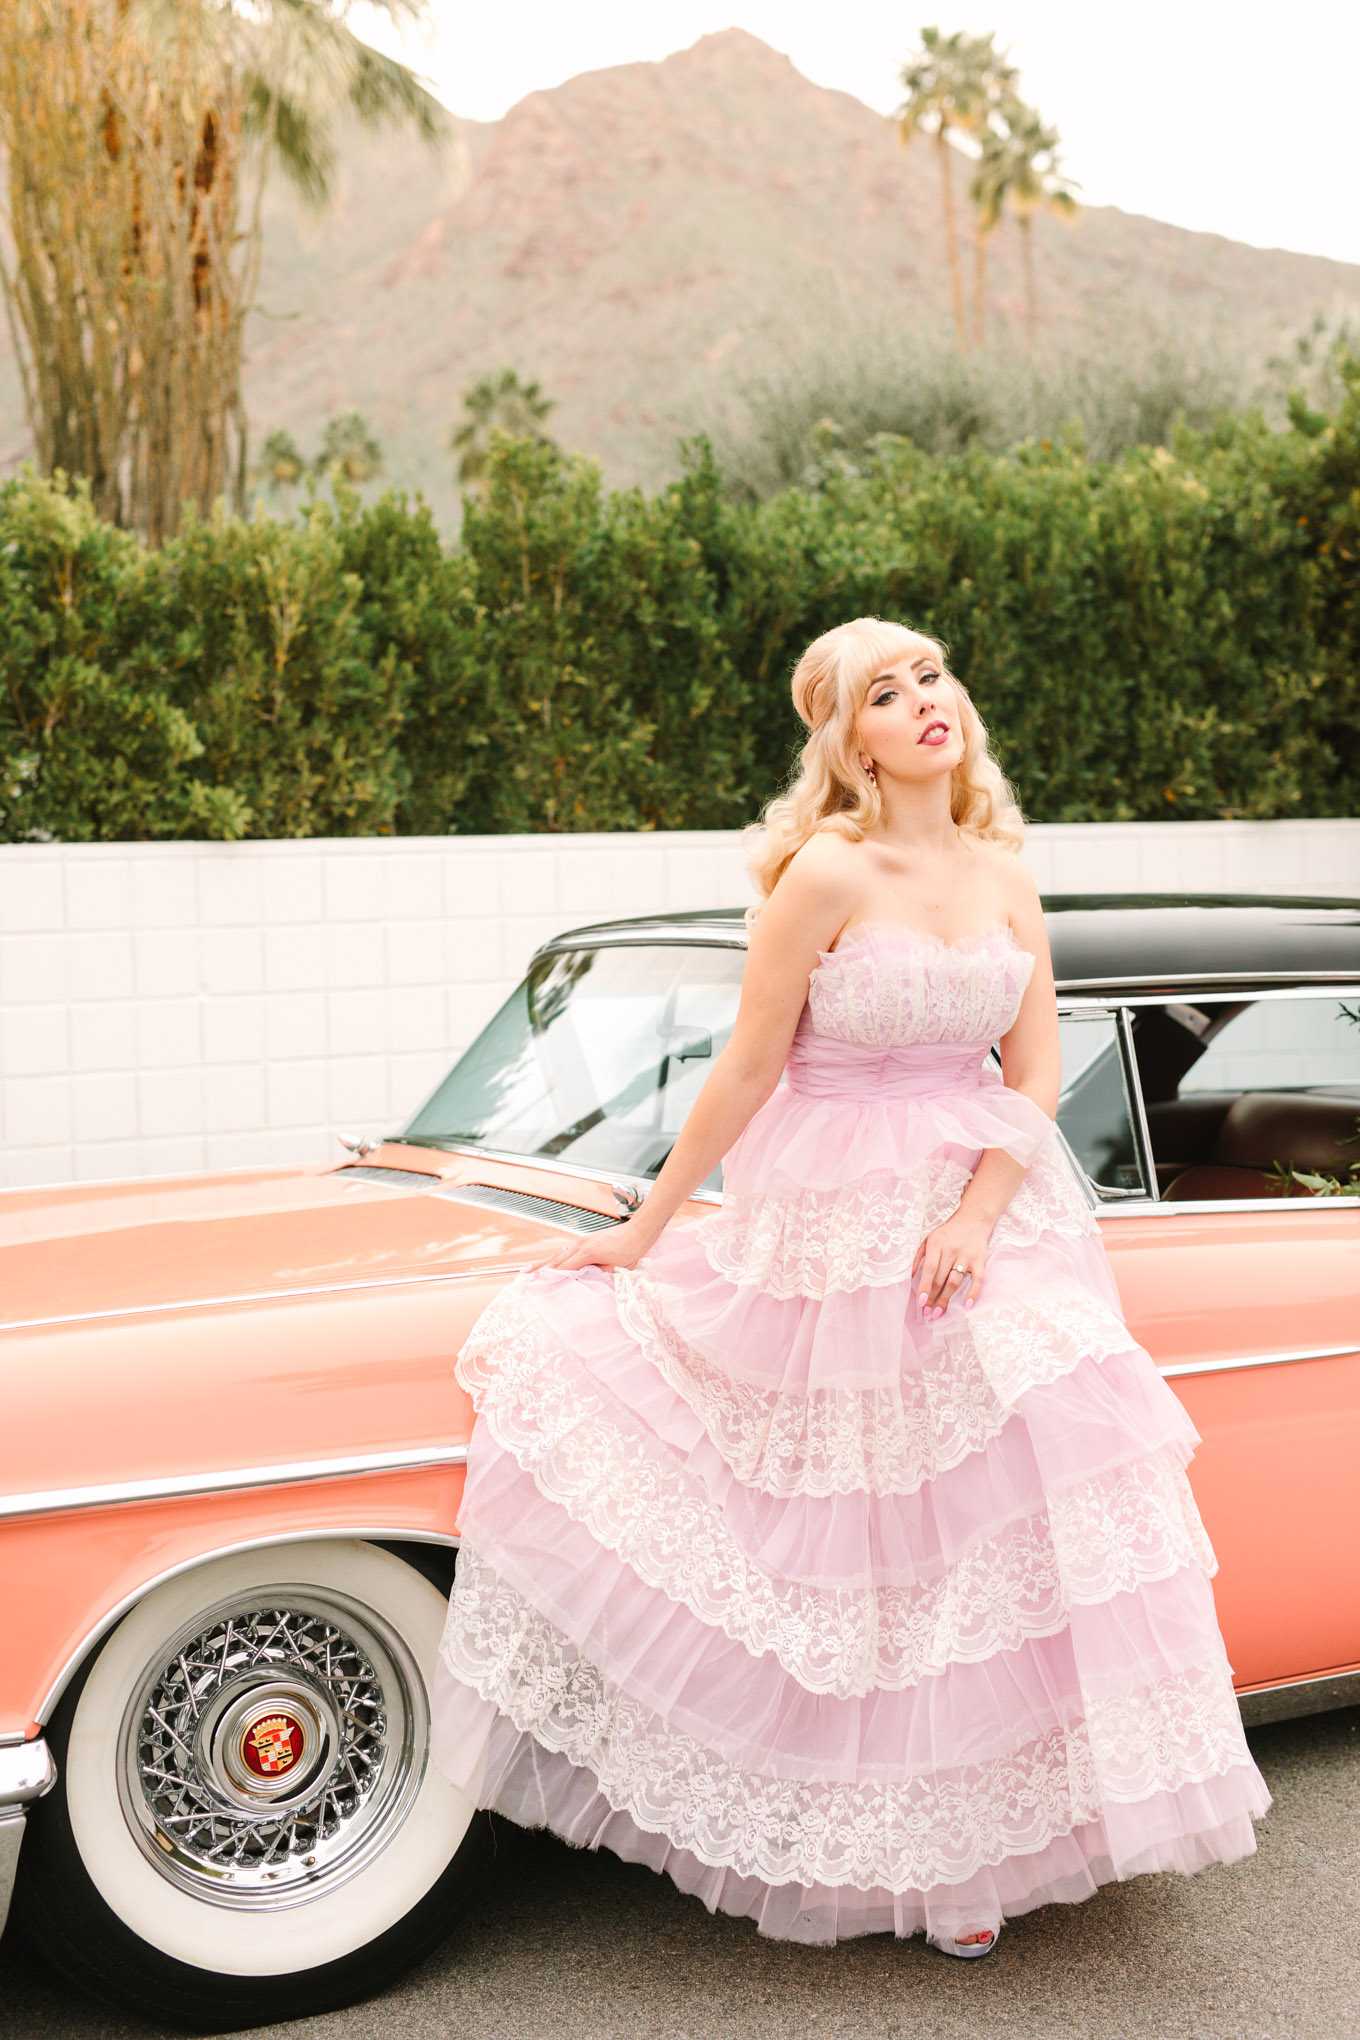 Bride in retro prom dress. Modern vintage-inspired Palm Springs engagement session with a 1960s pink Cadillac, retro clothing, and flowers by Shindig Chic. | Colorful and elevated wedding inspiration for fun-loving couples in Southern California | #engagementsession #PalmSpringsengagement #vintageweddingdress #floralcar #pinkcar   Source: Mary Costa Photography | Los Angeles